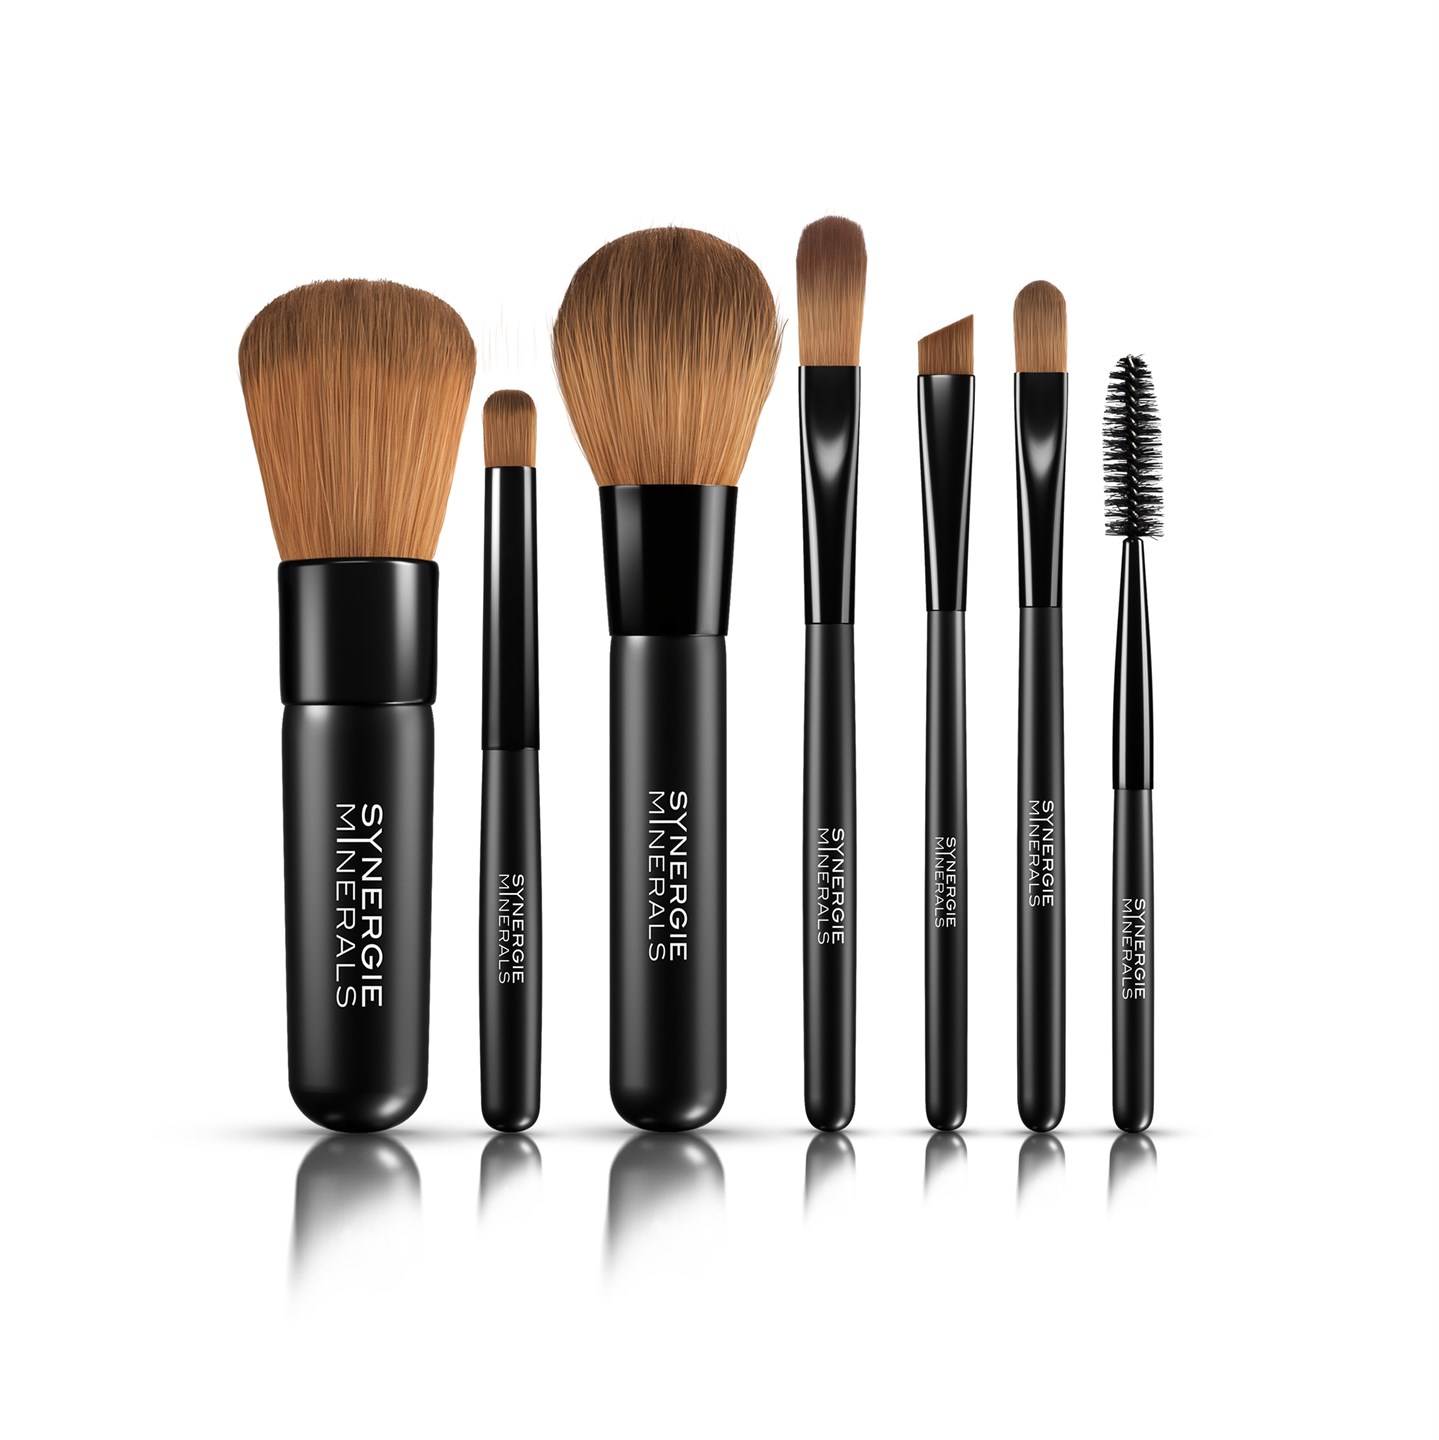 Synergie Minerals Travel Essential Brush Kit